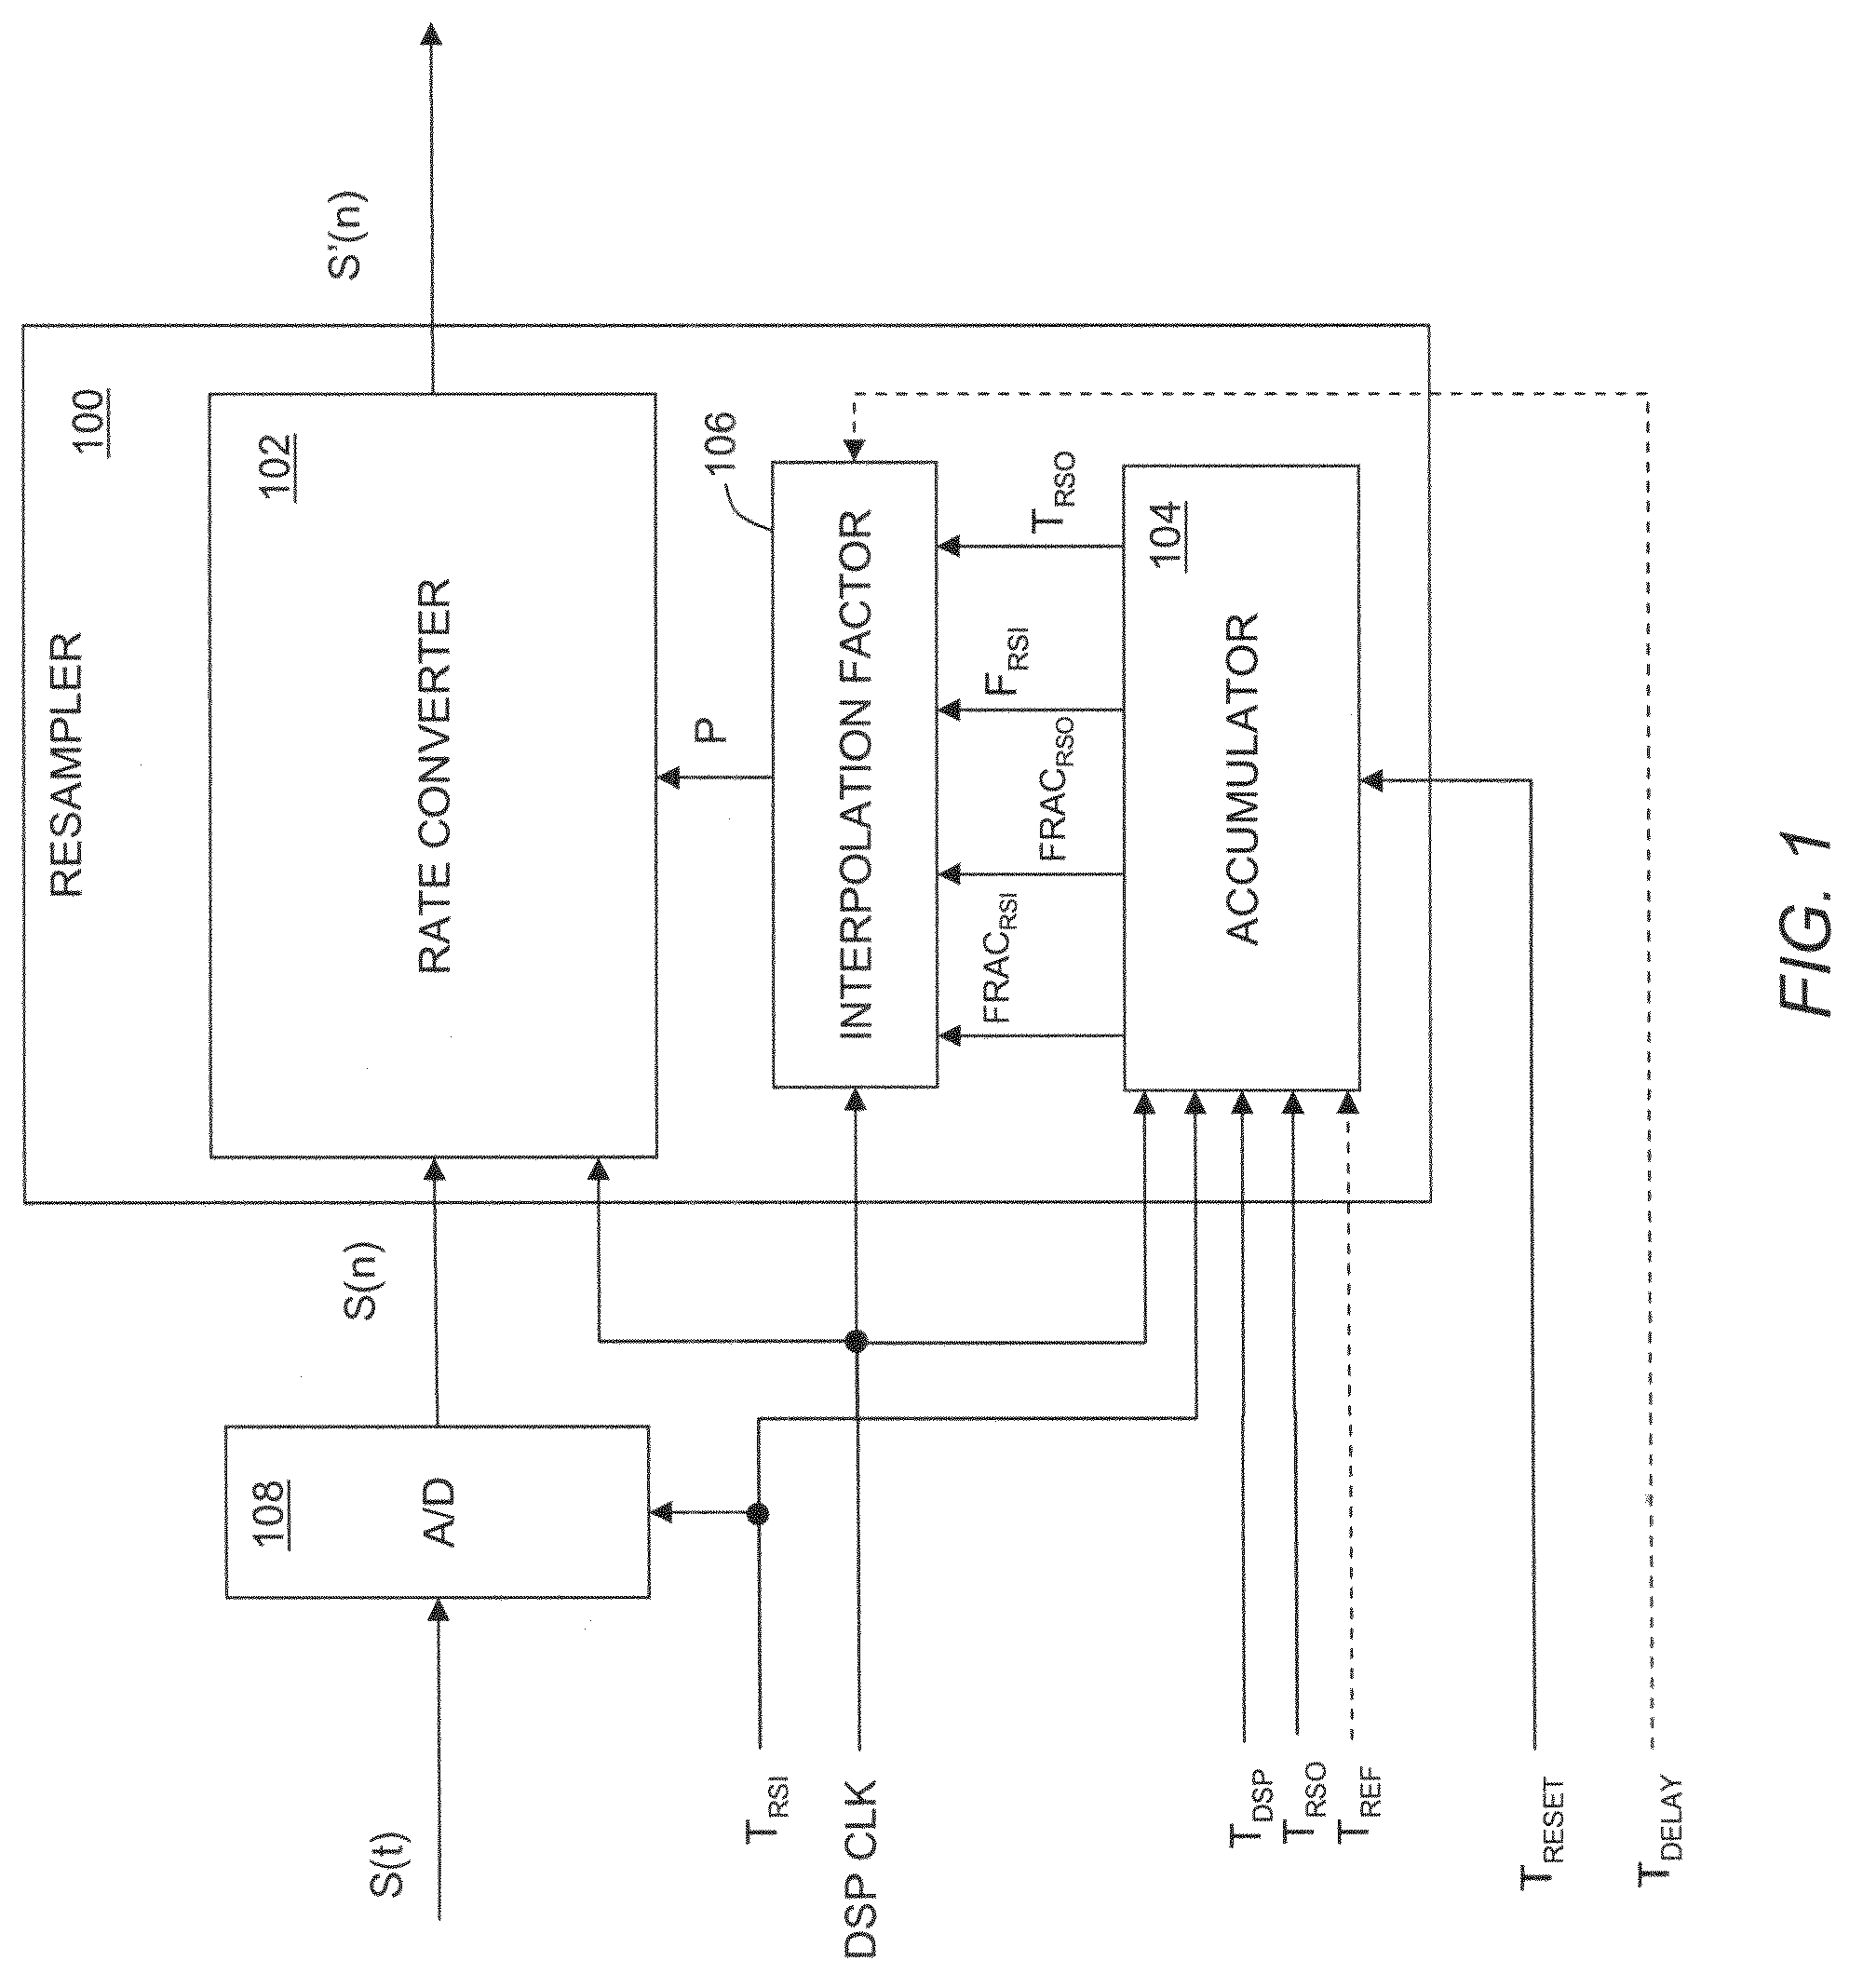 Method and apparatus for computing interpolation factors in sample rate conversion systems